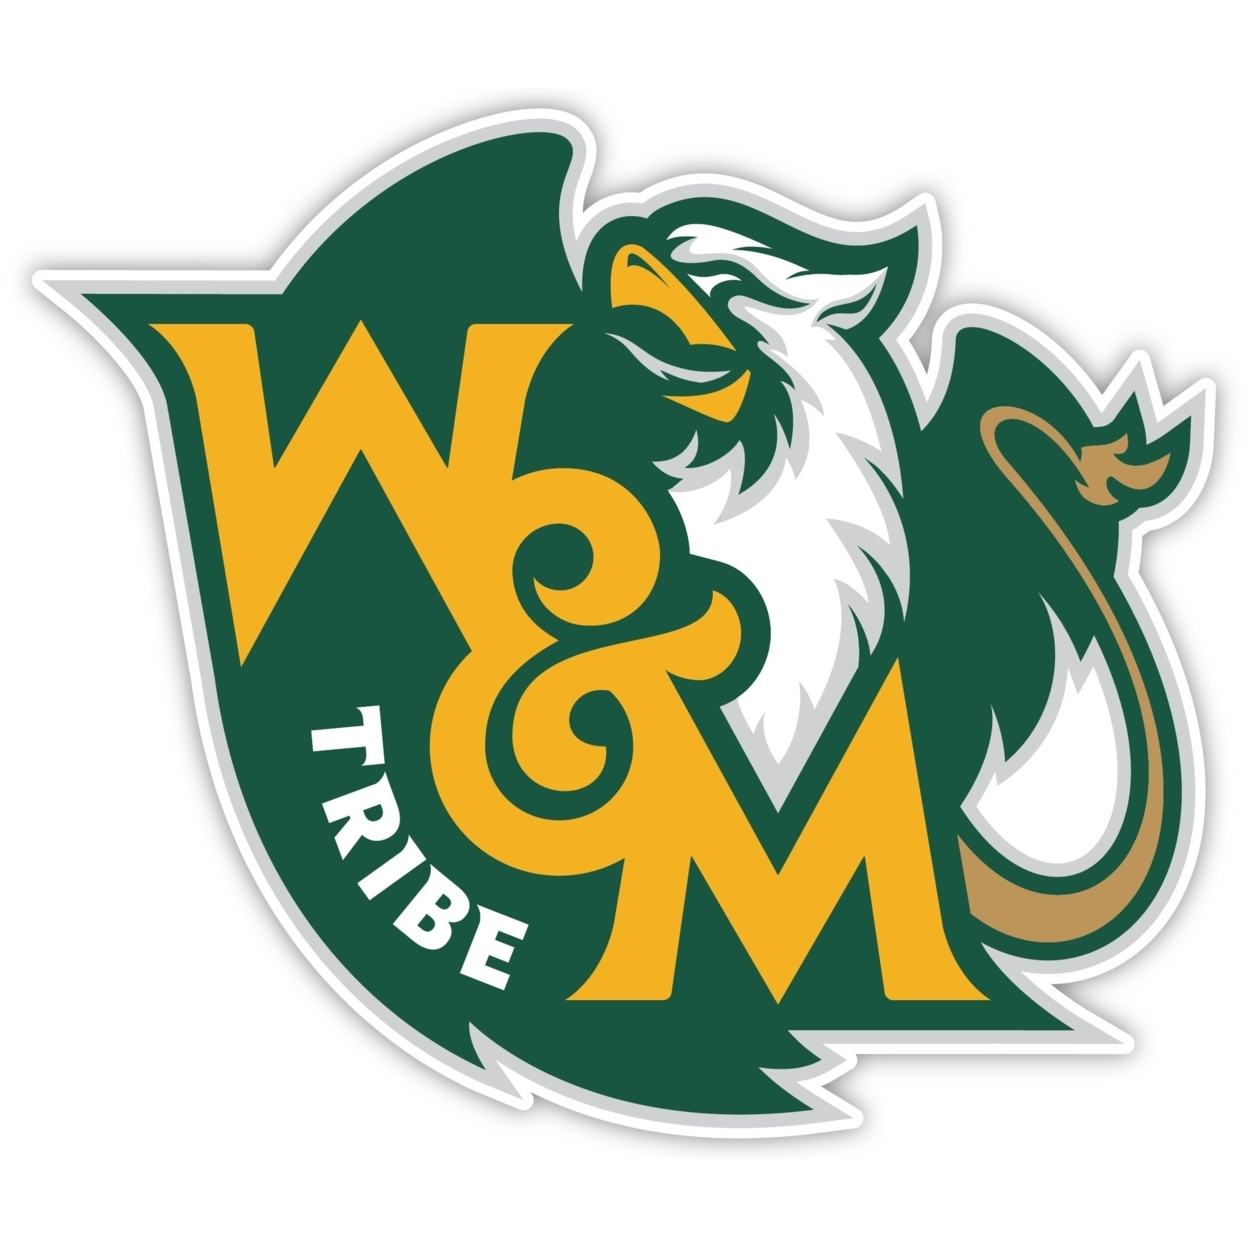 William And Mary 6 Inch Vinyl Mascot Decal Sticker - 1, 6-Inch